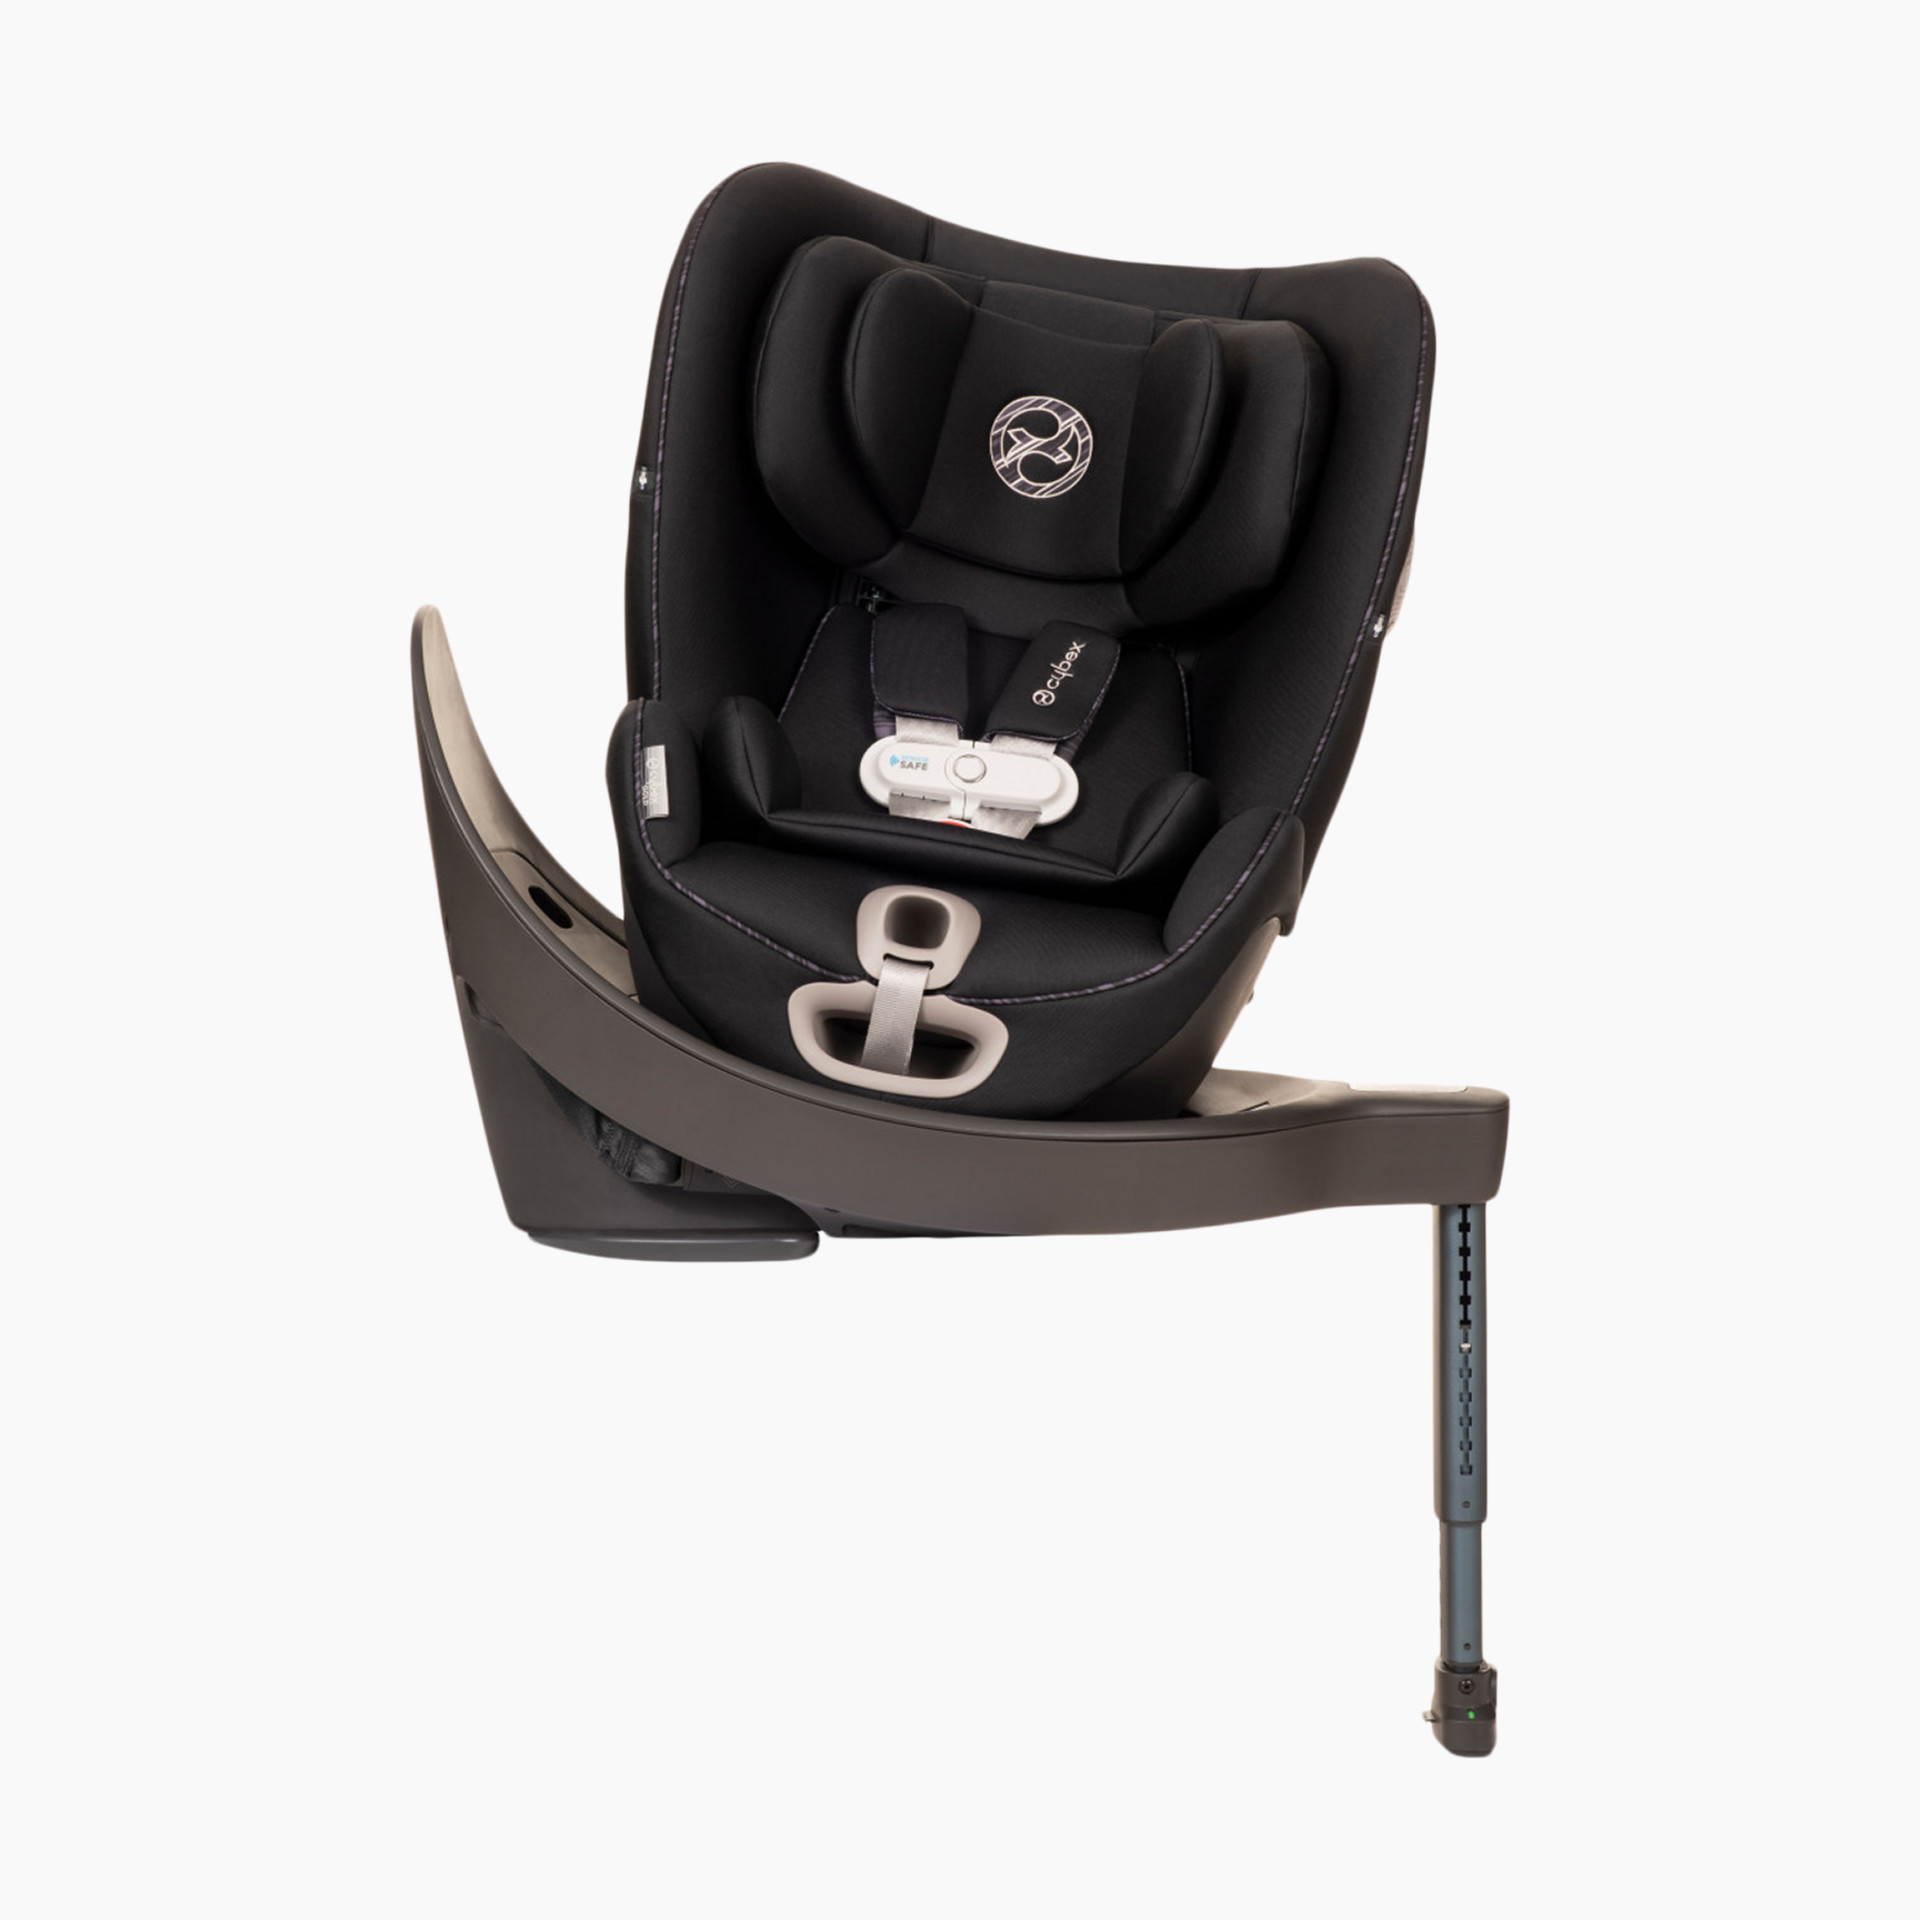 Cybex cup holder for car seats - buy online